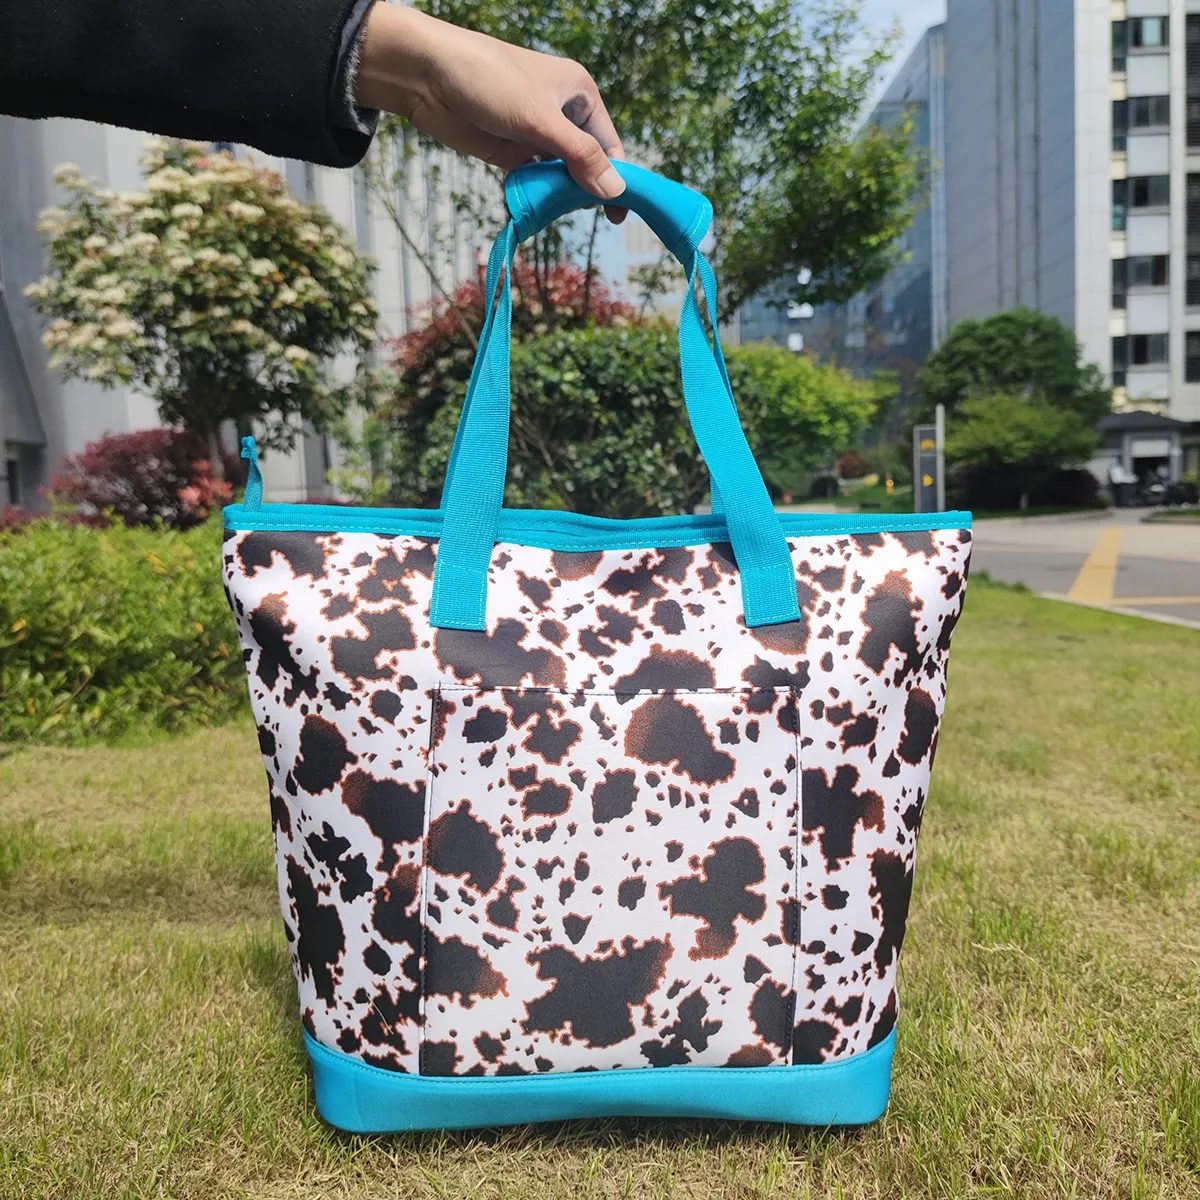 

wholesale Insulated Thermal Bag Sturdy Large Sealed Grocery Cooler Canvas Serape Leopard Cooler Cow Hide Tote Bag, 4 colors